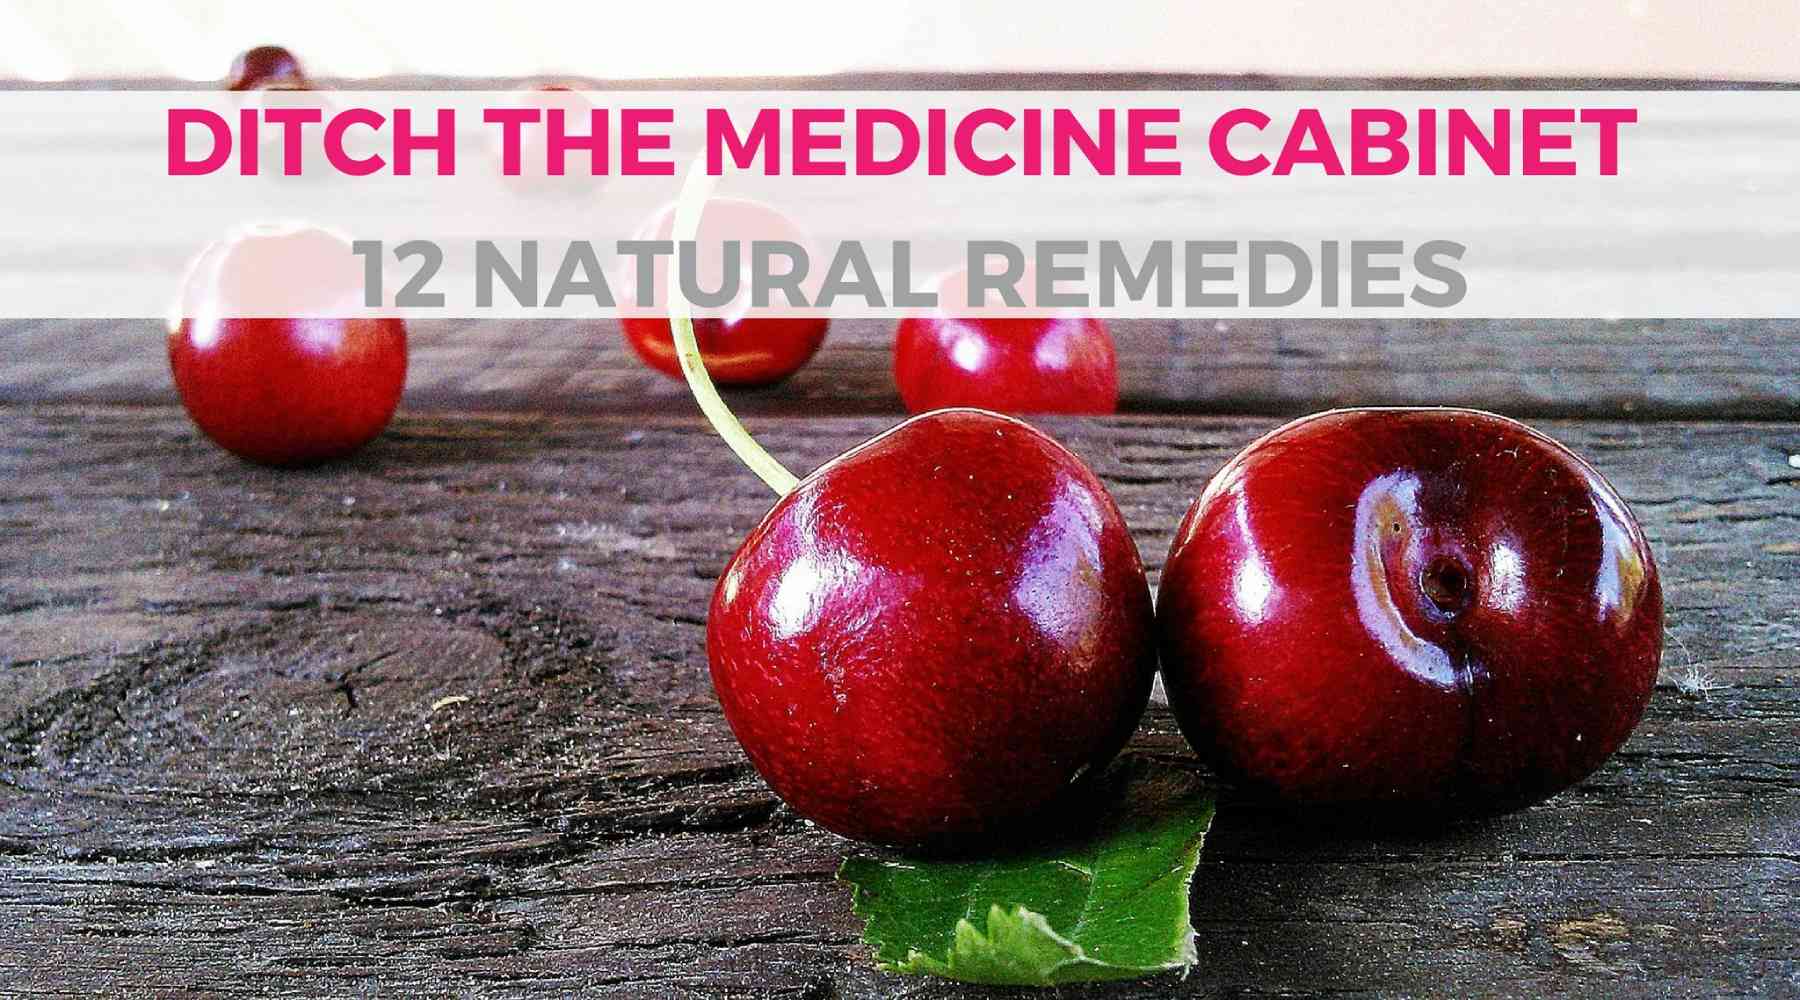 Cold & flu season is upon us & that means more of us are reaching into the medicine cabinet to find a quick fix for colds, for sinus infections, & for headaches– among other things! But have you ever thought to try natural remedies that you can easily mak